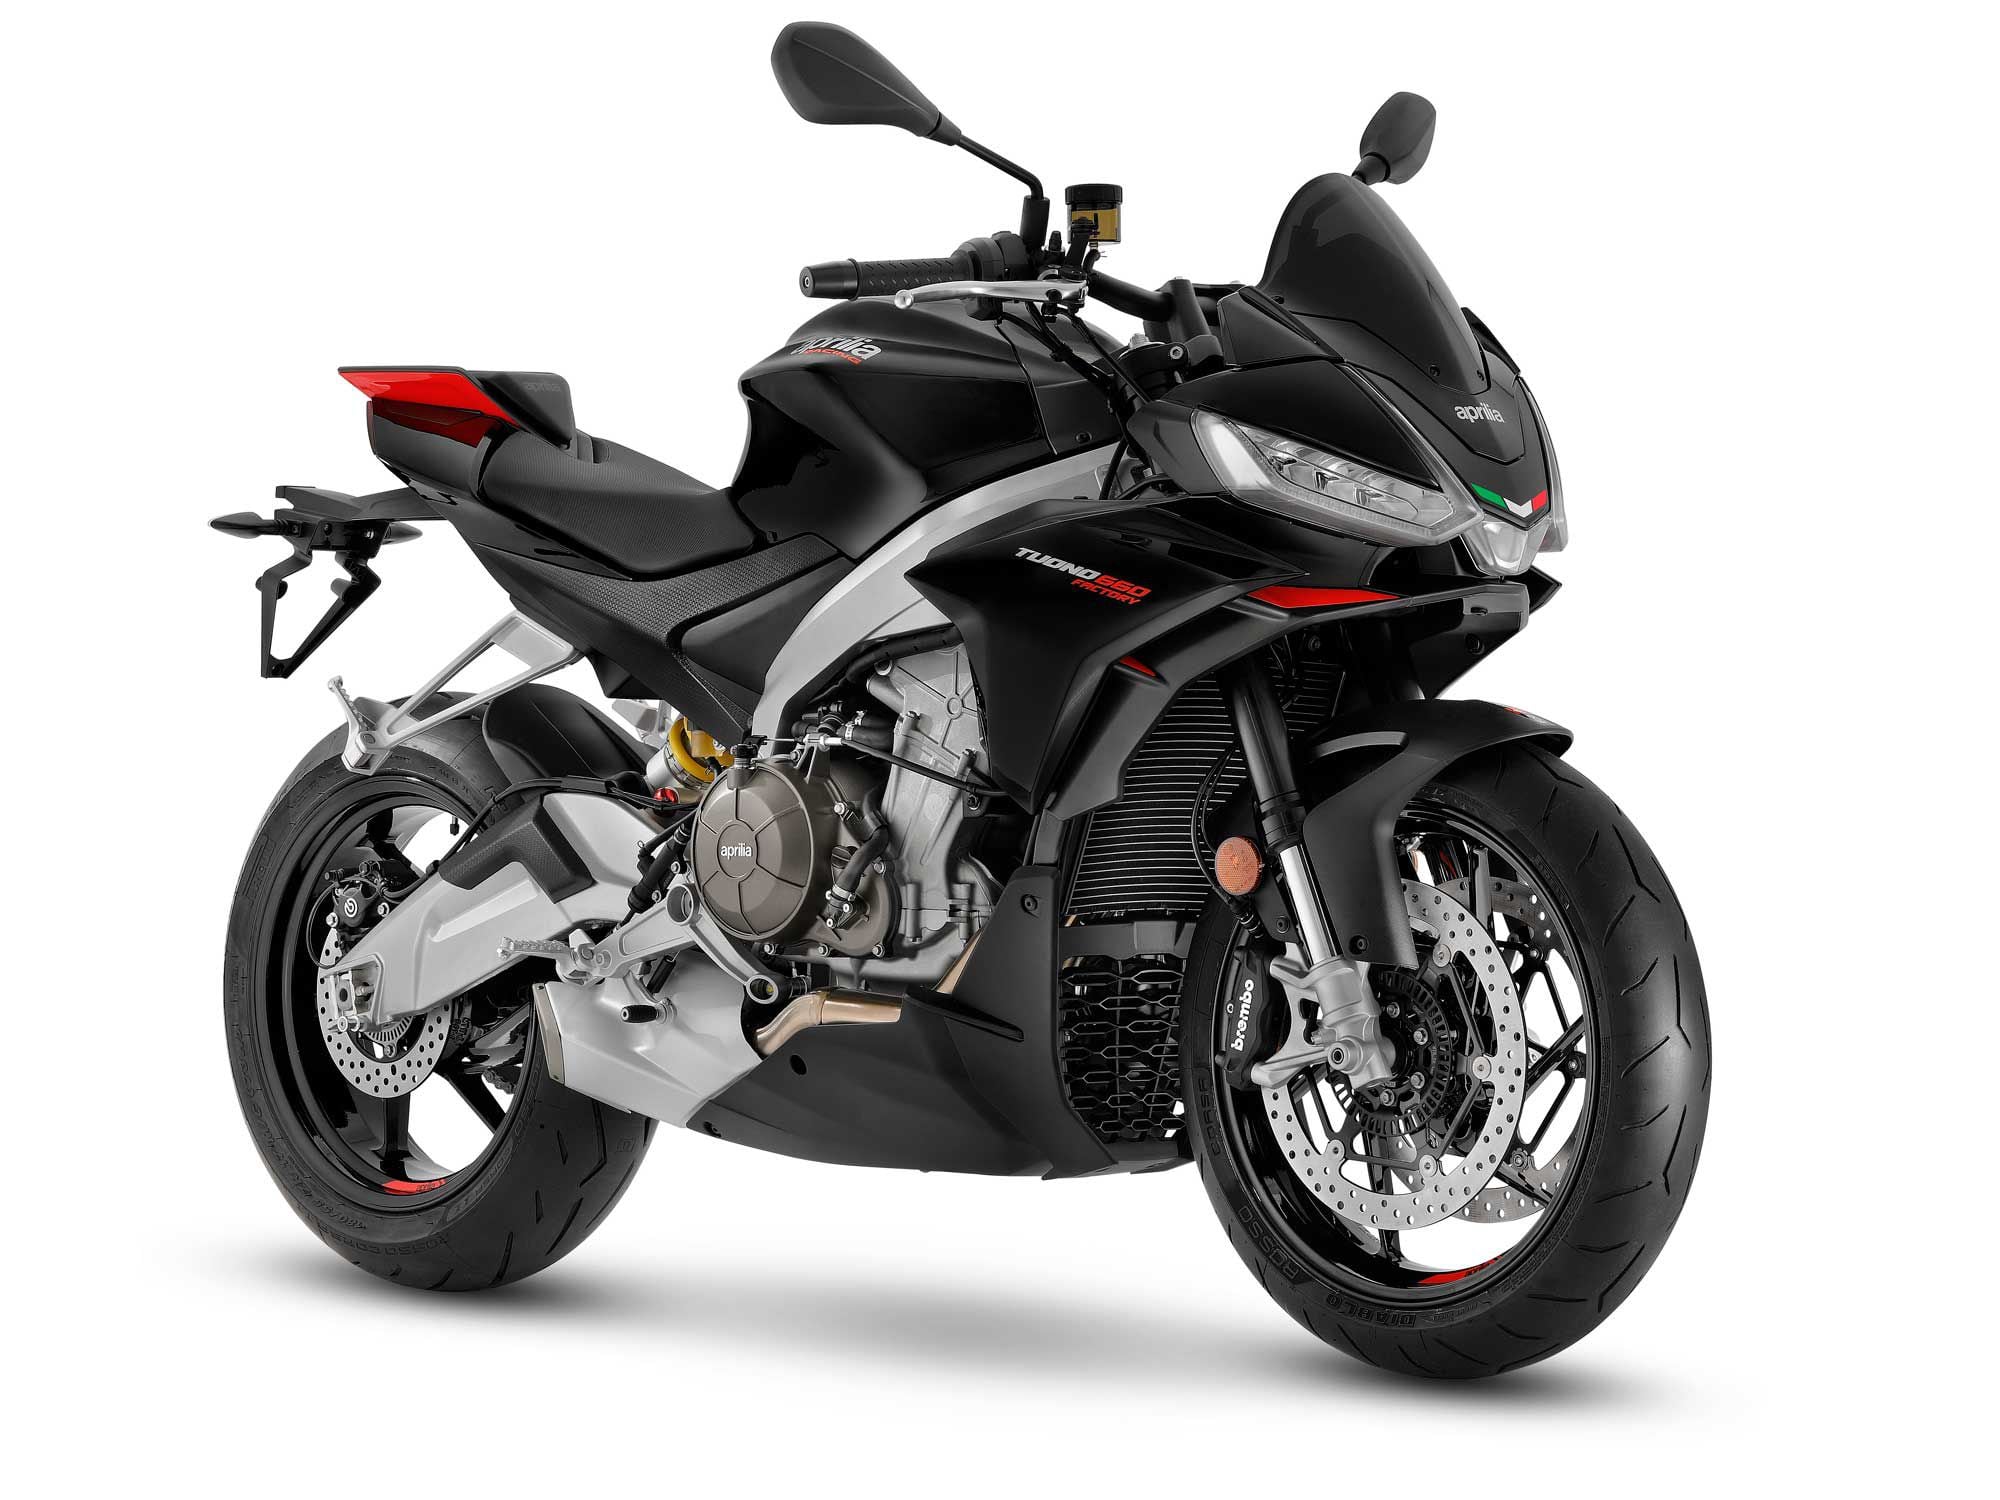 The 2022 Aprilia Tuono 660 Factory gets fully adjustable suspension, a six-axis IMU, a lithium-ion battery, and adaptive LED headlights.